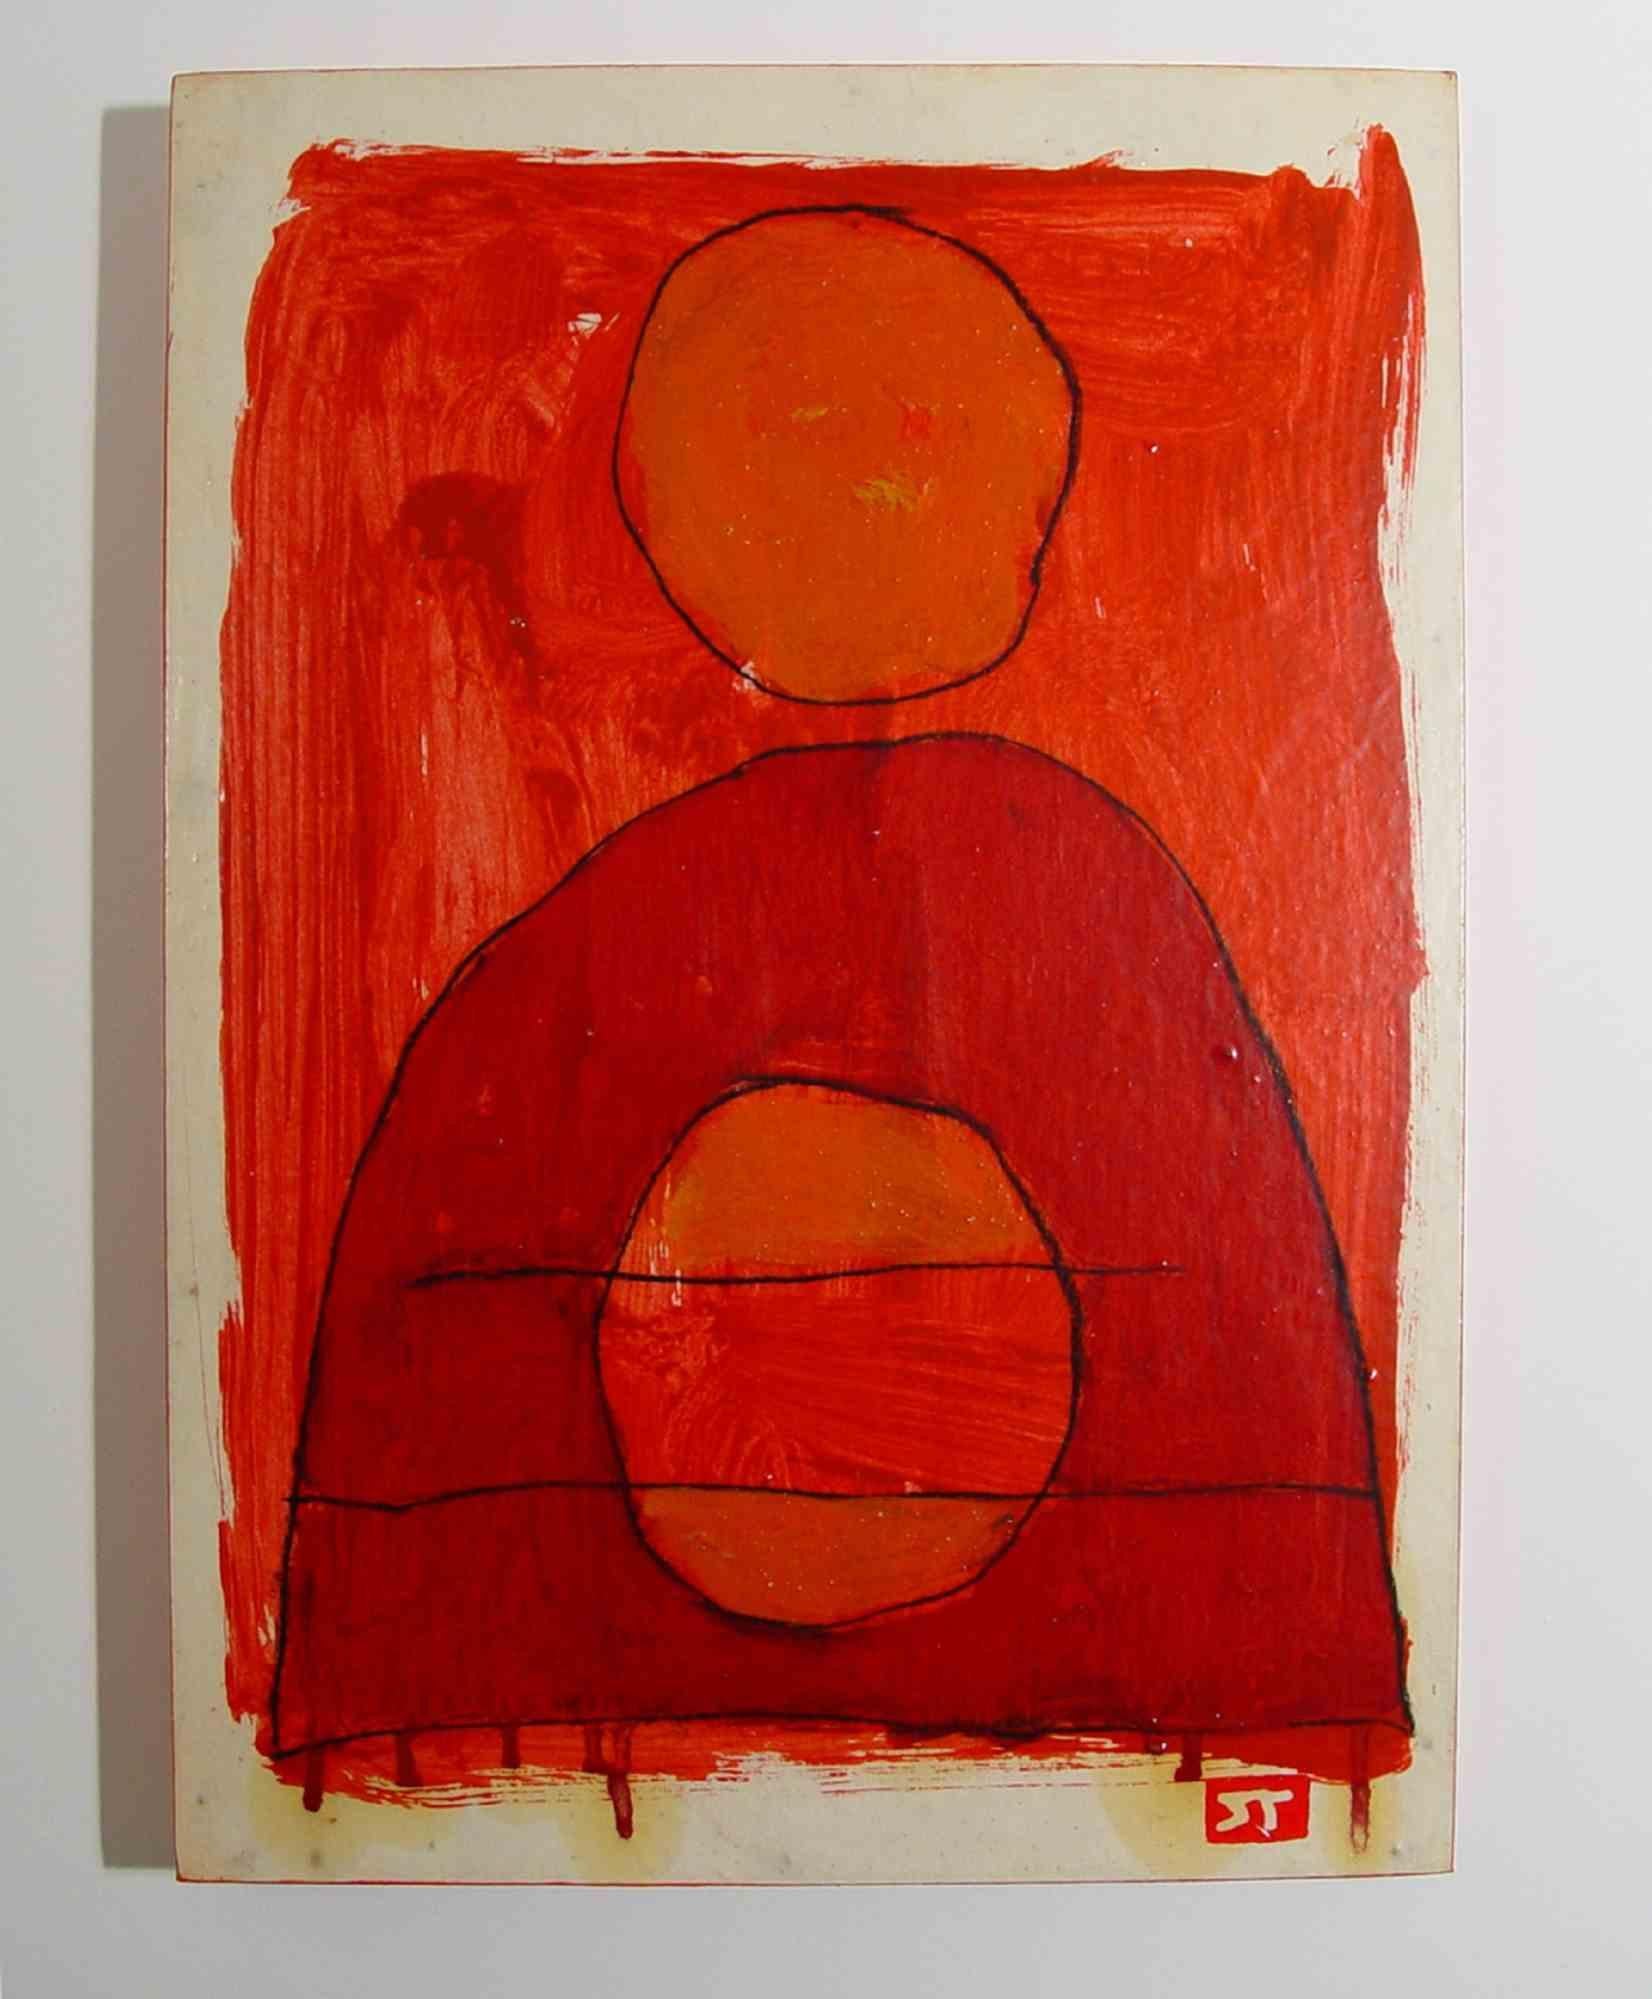 Intersections 1 is a painting realized by the Italian artist Salvatore Travascio in the 2010s.

This is a beautiful oil painting on paper on wooden support. Hand-signed on the lower right. Perfect conditions.

What has motivated the artist for many